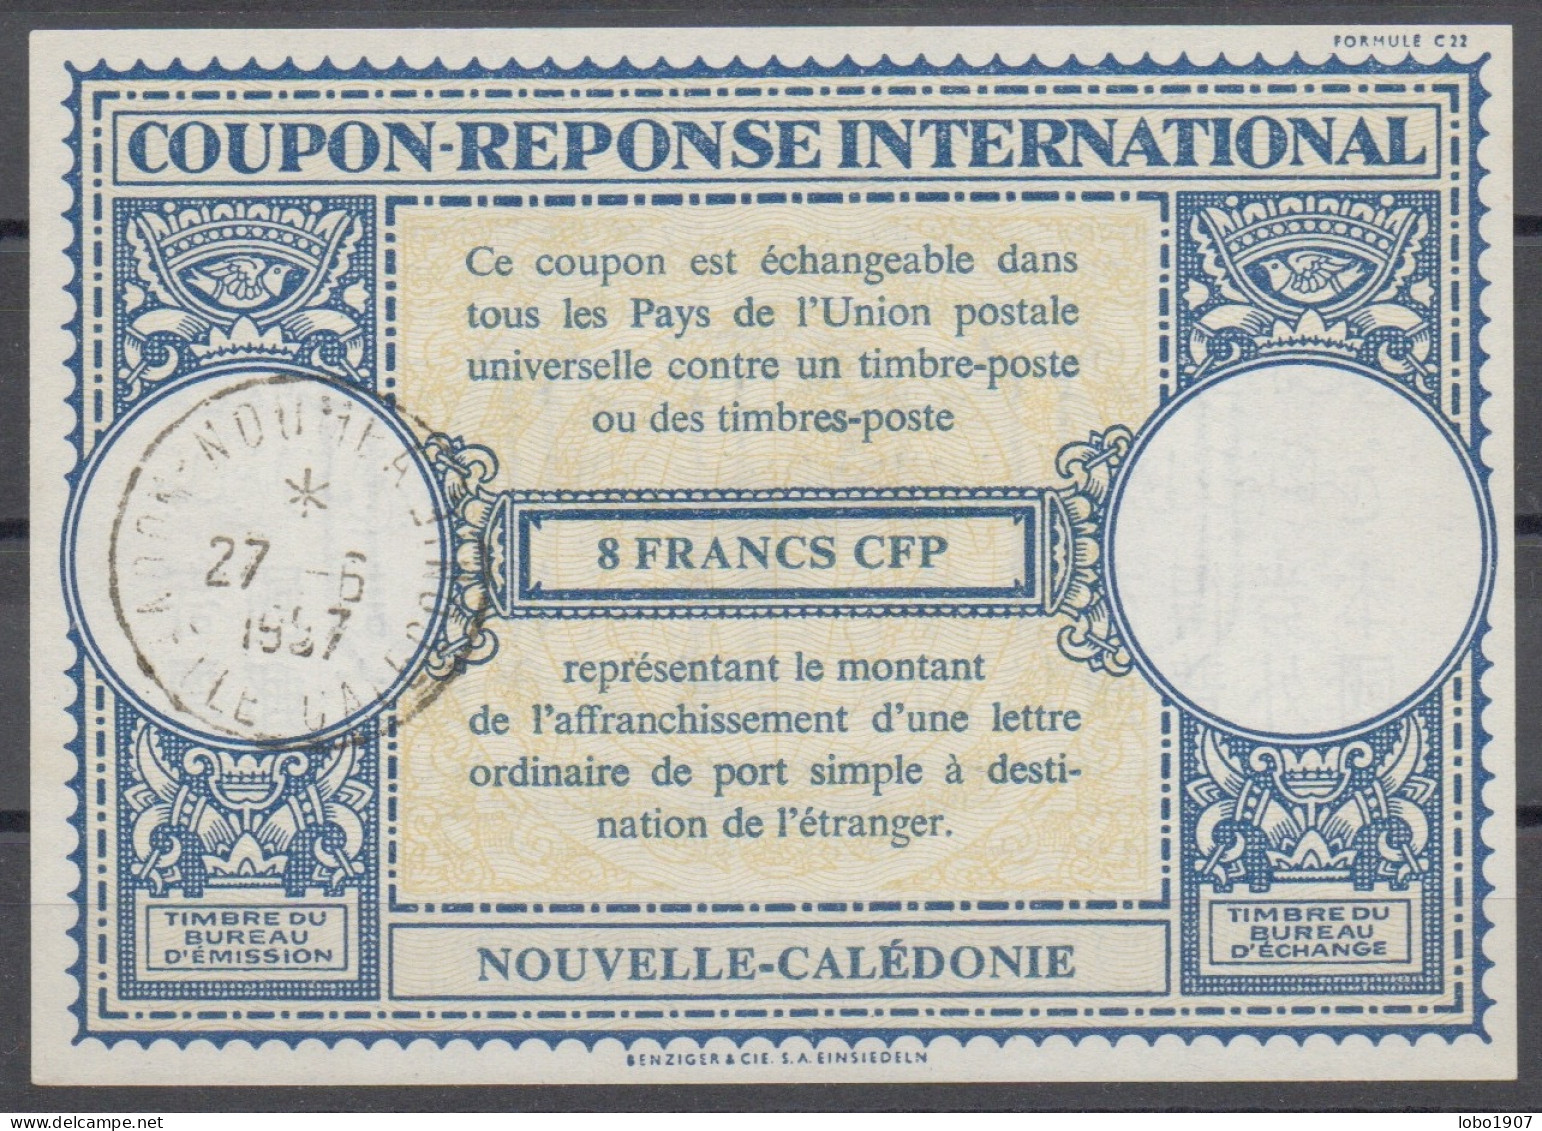 NOUVELLE CALEDONIE  Lo16n  8 FRANCS CFP International Reply Coupon Reponse Antwortschein IRC IAS NOUMEA 27.06.57 Pdv! - Entiers Postaux